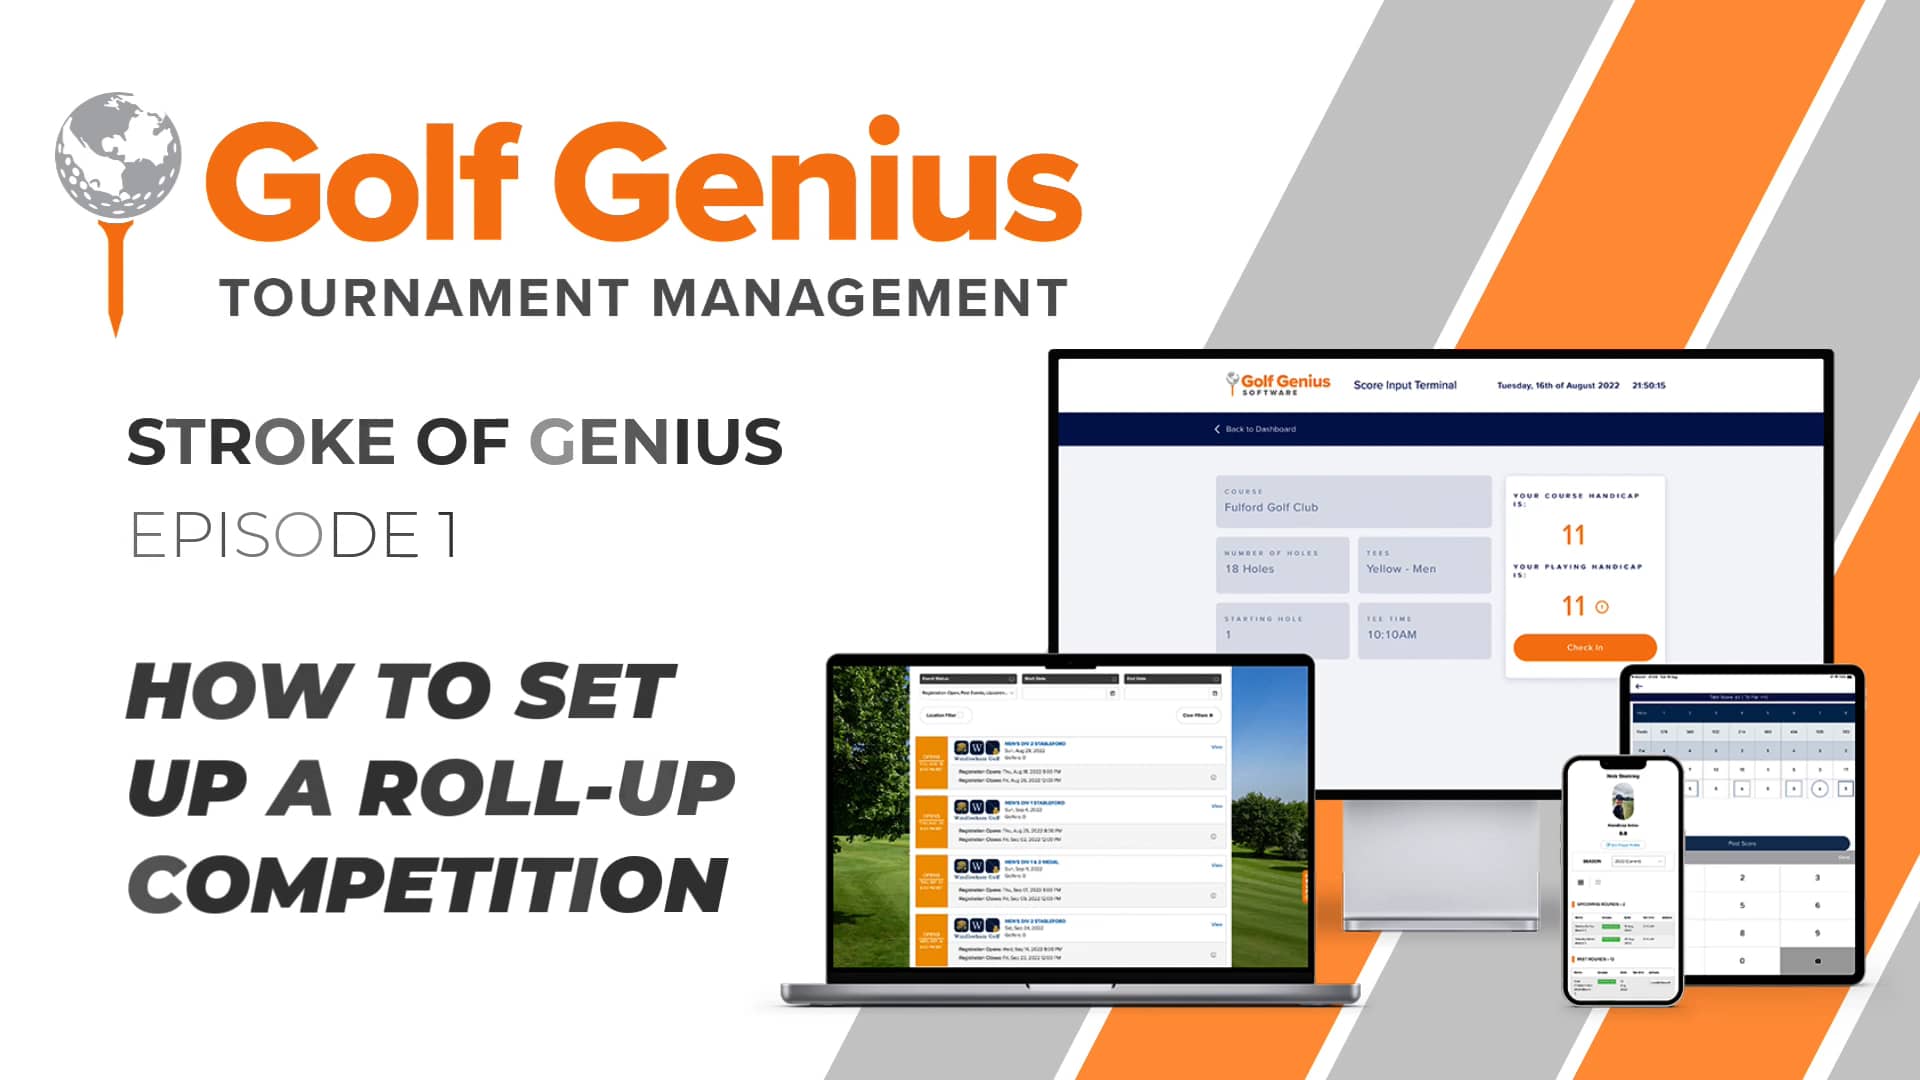 How to set up a rollup competition with Golf Genius Tournament